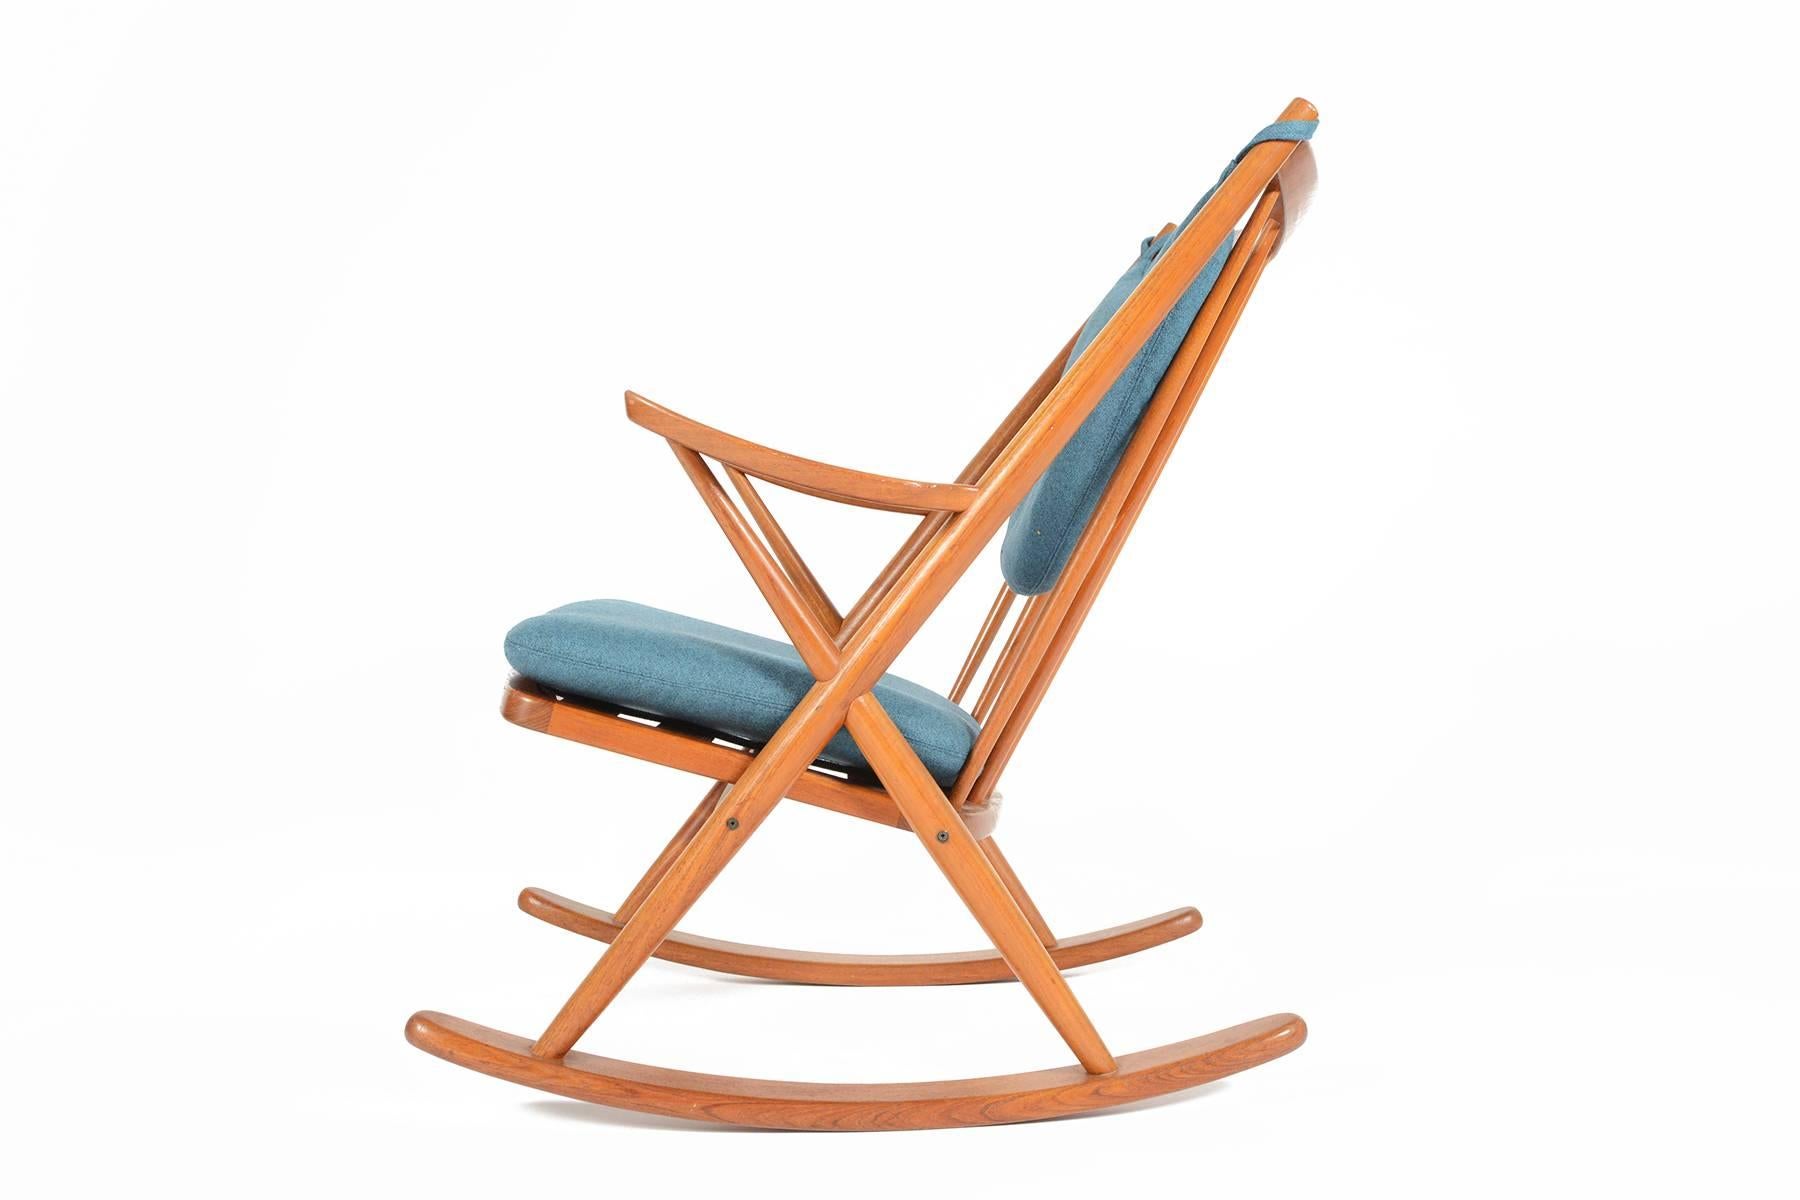 This Danish modern mid century rocking chair is a rare find. Crafted in teak and designed by Frank Reenskaug for Bramin, this rocker has been recently recovered in Danish Kvadrat cerulean wool. The frame is in excellent vintage condition with